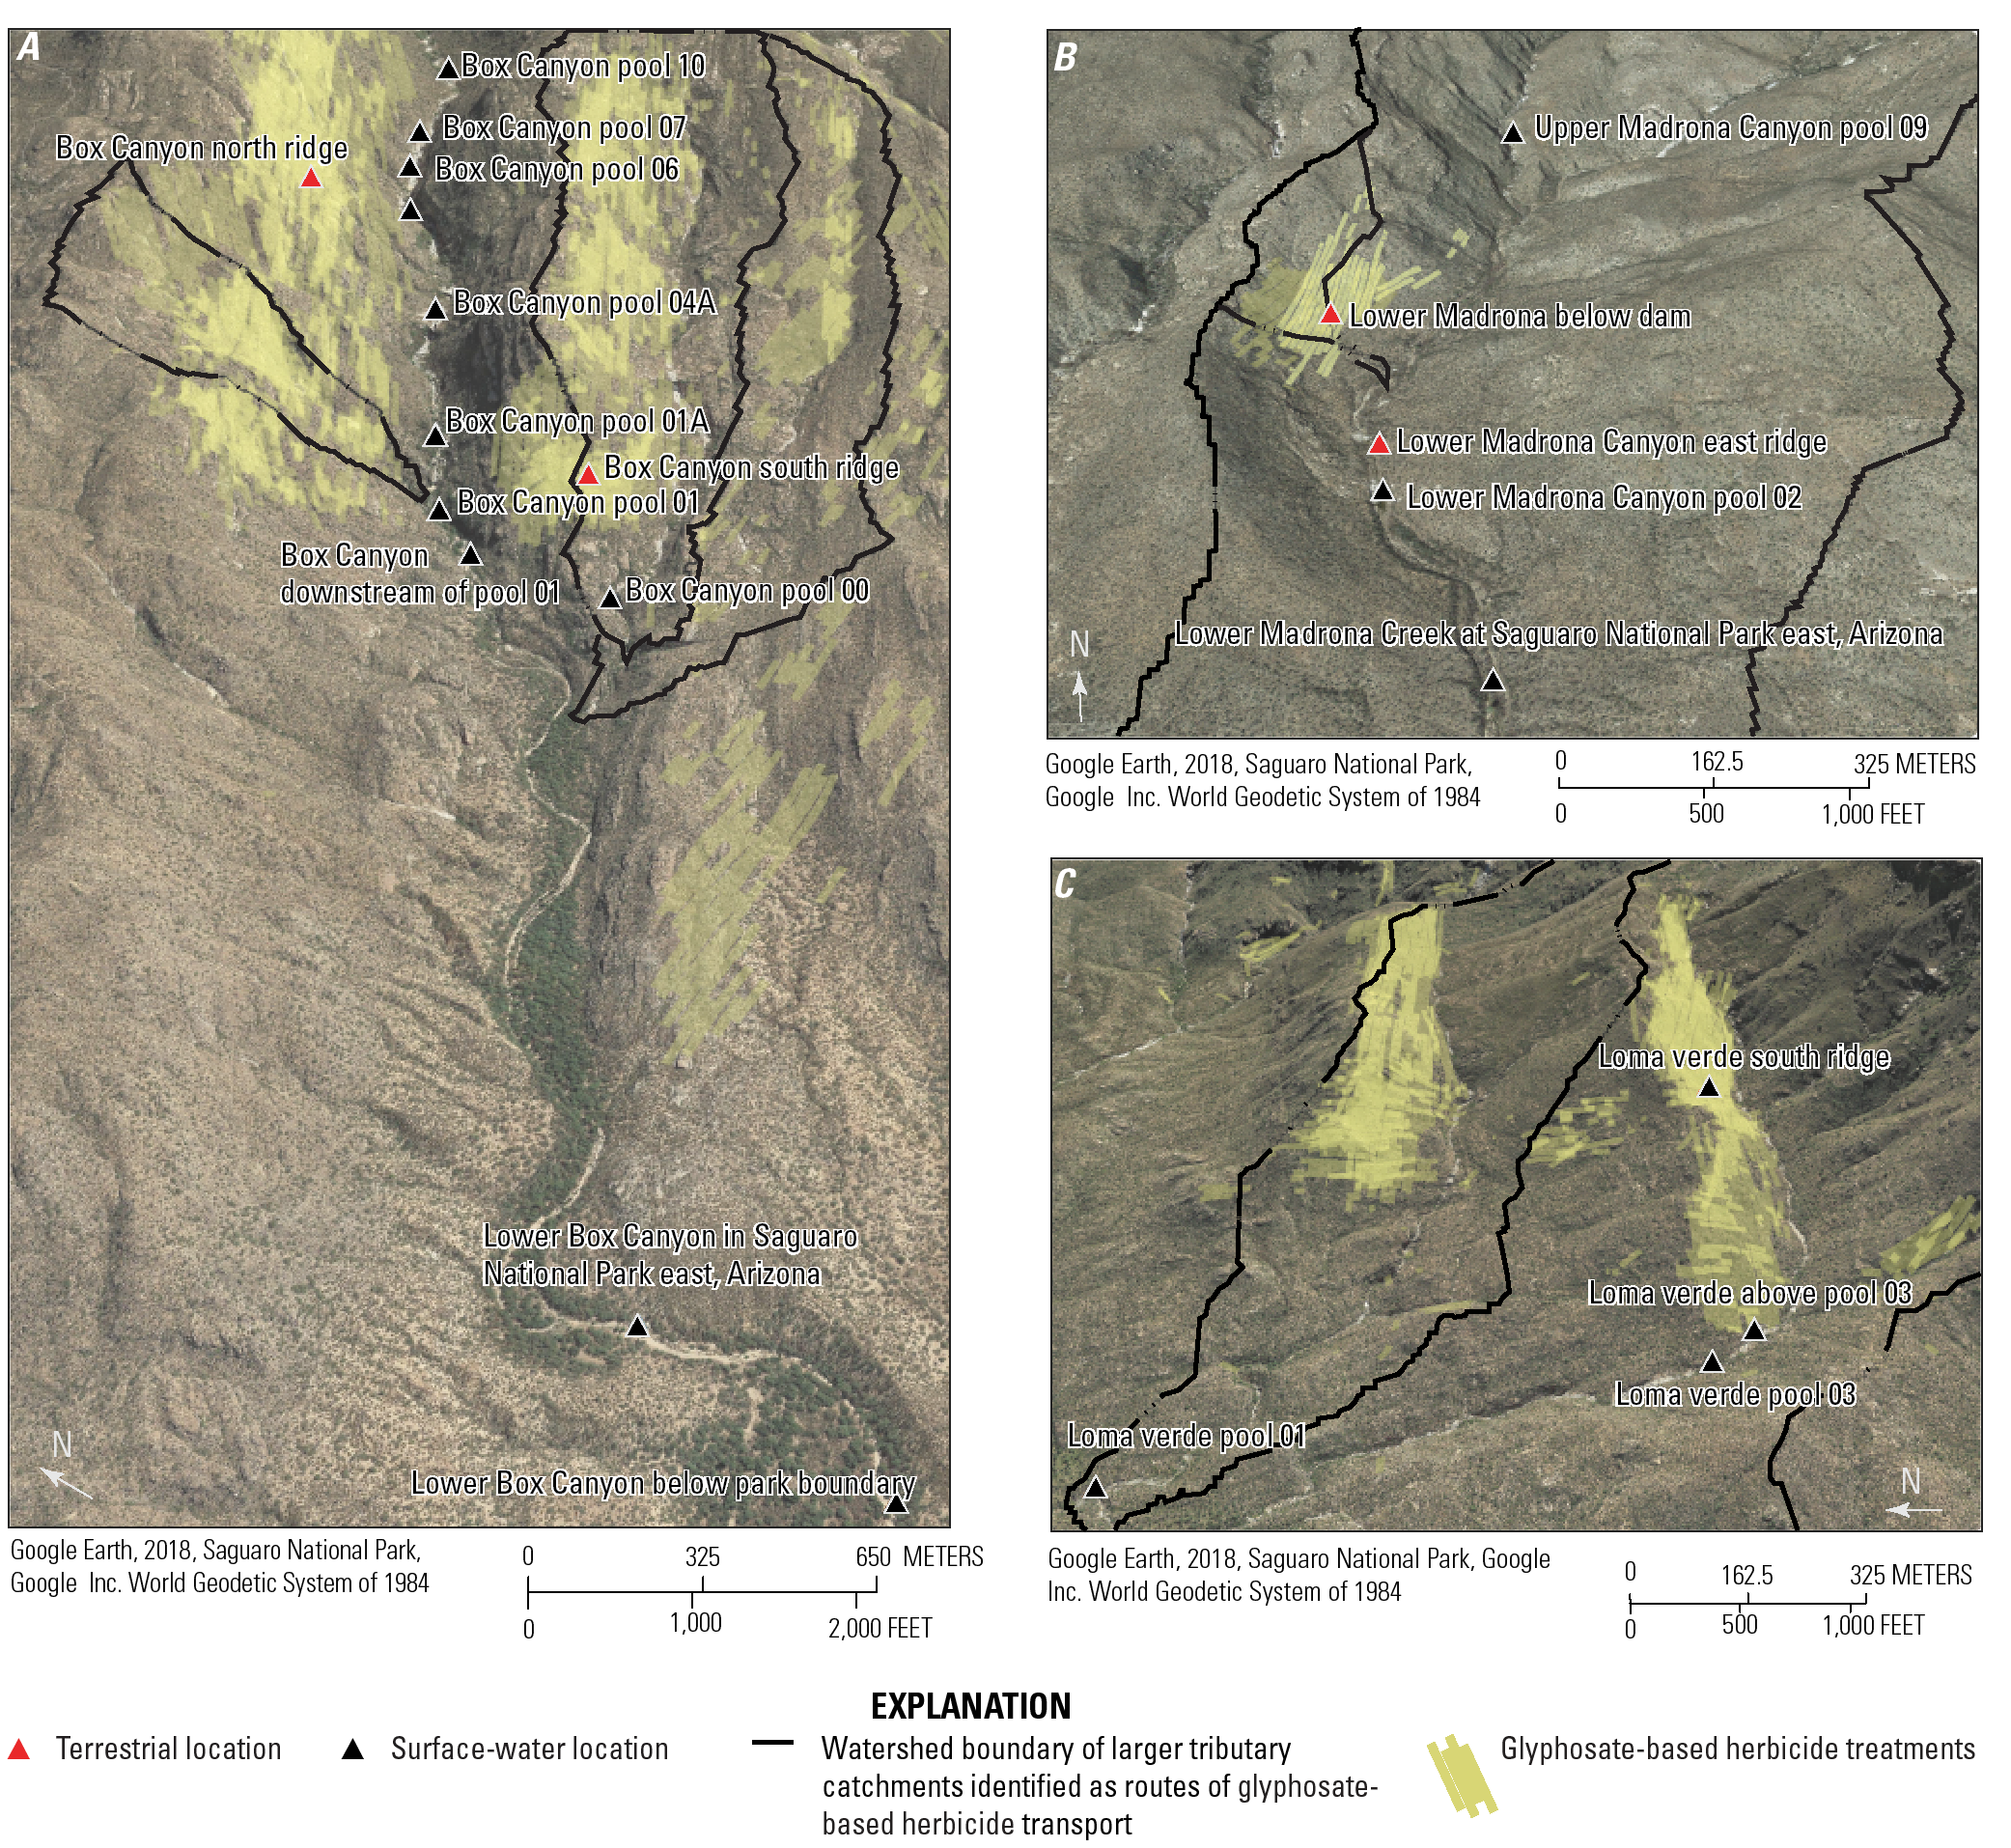 Terrain imagery map with pool and terrestrial sampling locations and location of automatic
                        sampler installations